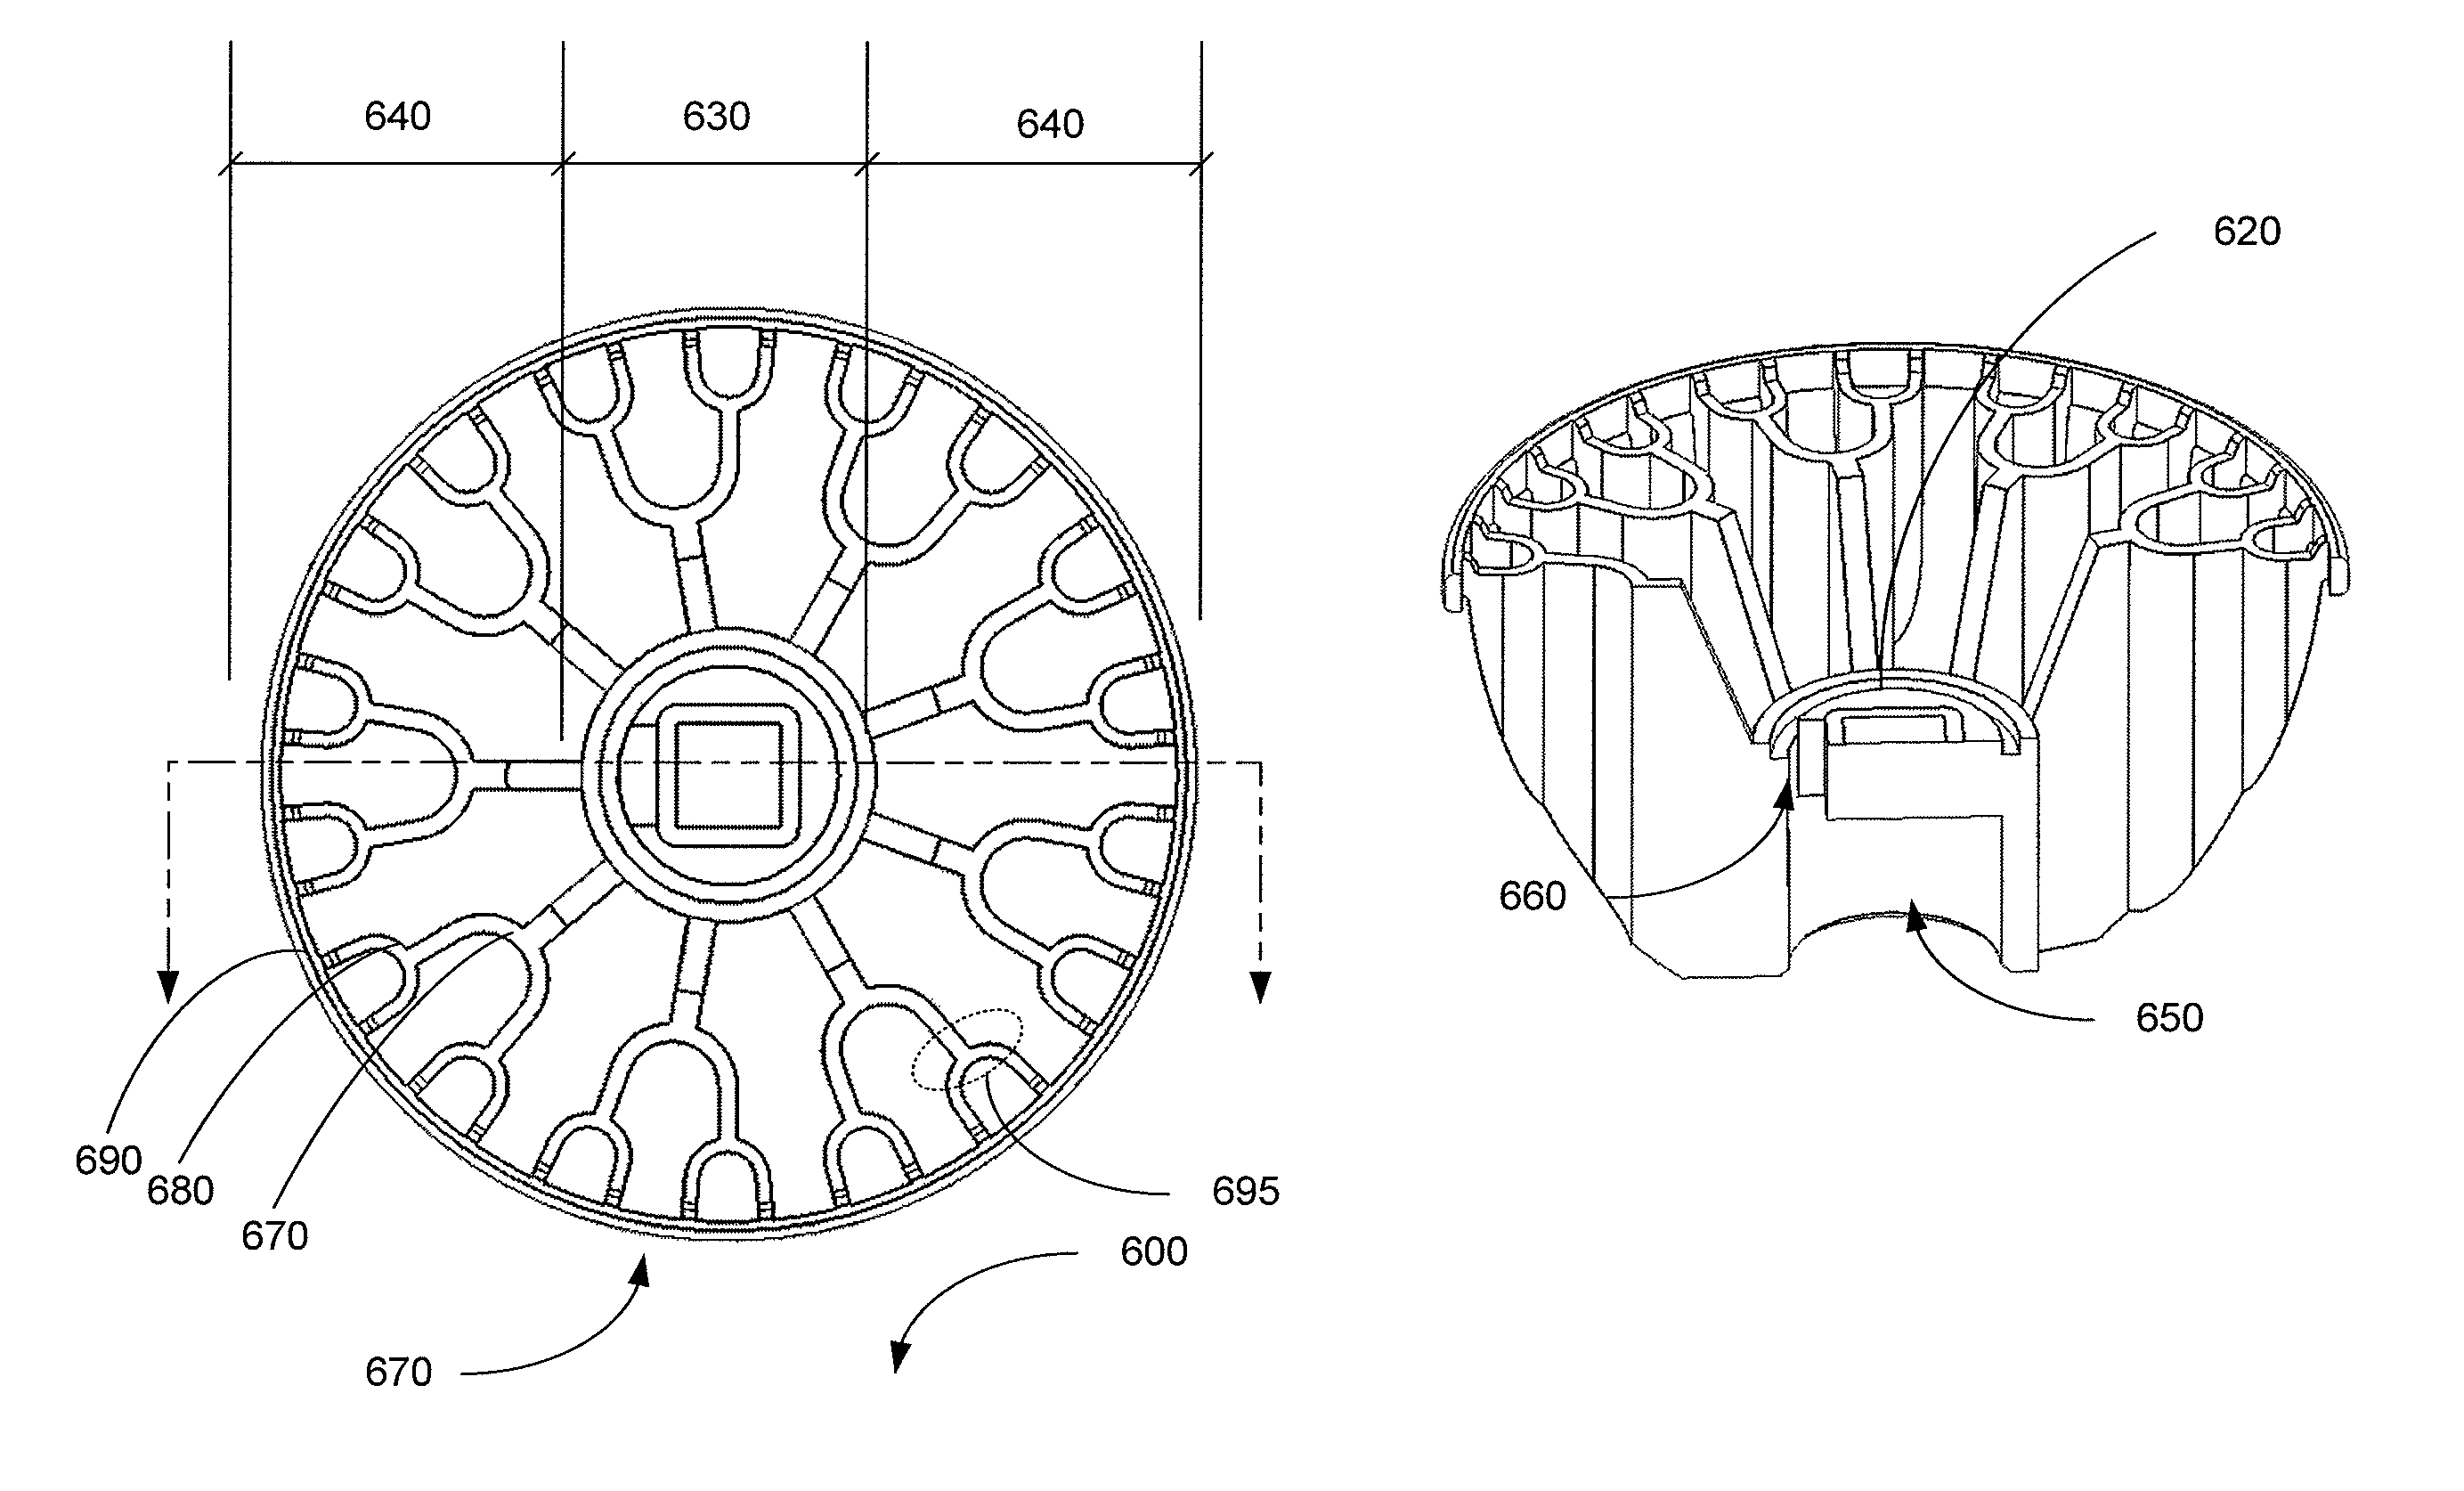 Illumination source with reduced inner core size